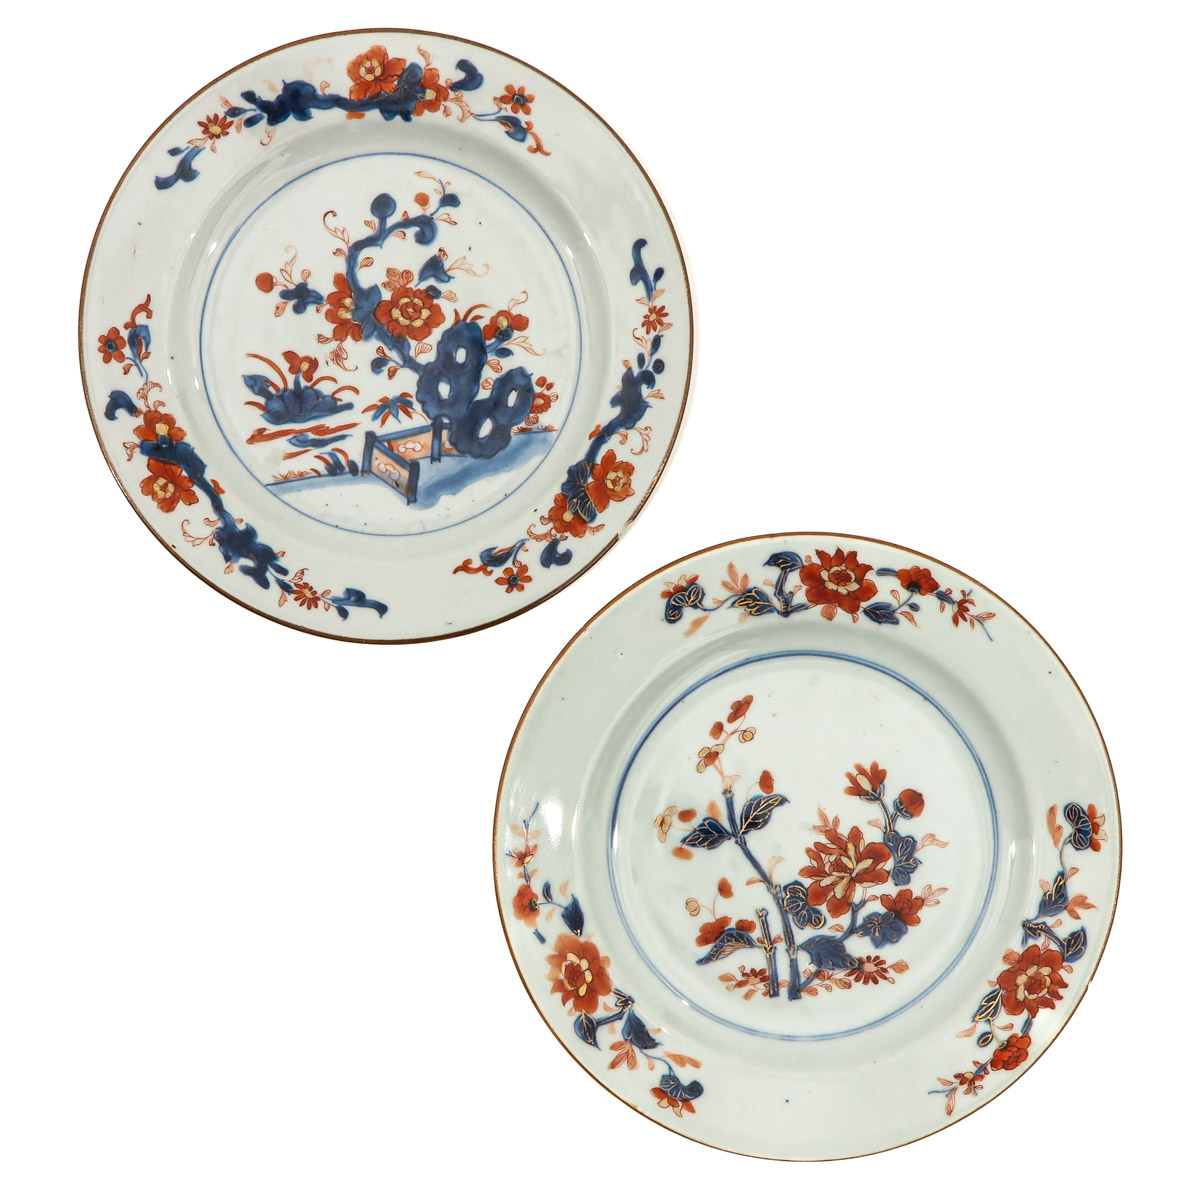 A Collection of 4 Imari Plates - Image 5 of 10